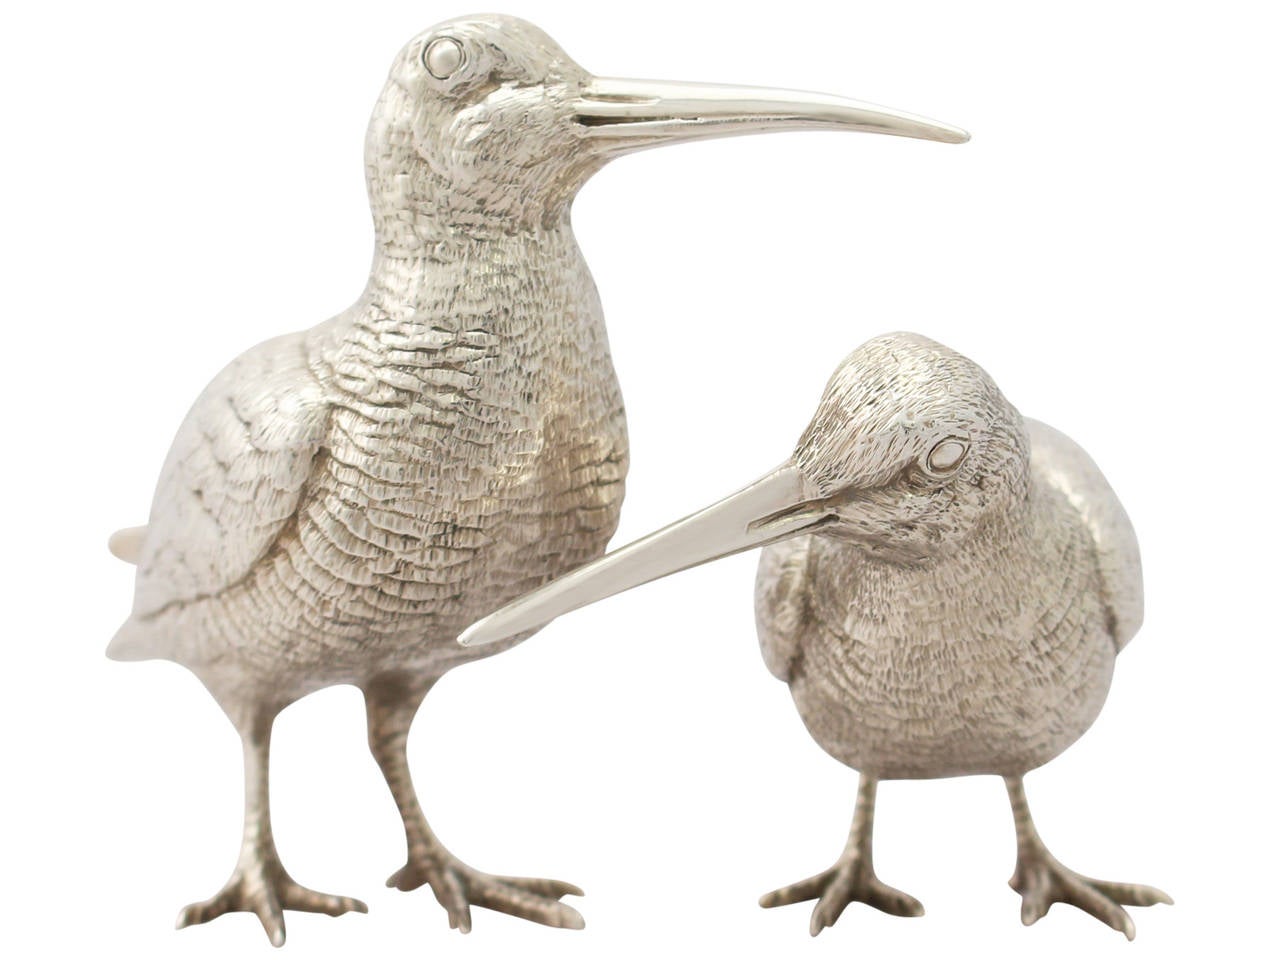 A fine contemporary pair of cast sterling silver model snipes; an addition to our silver animal collection

These fine contemporary cast sterling silver ornaments have been realistically modelled in the form of a pair of snipes.

These silver